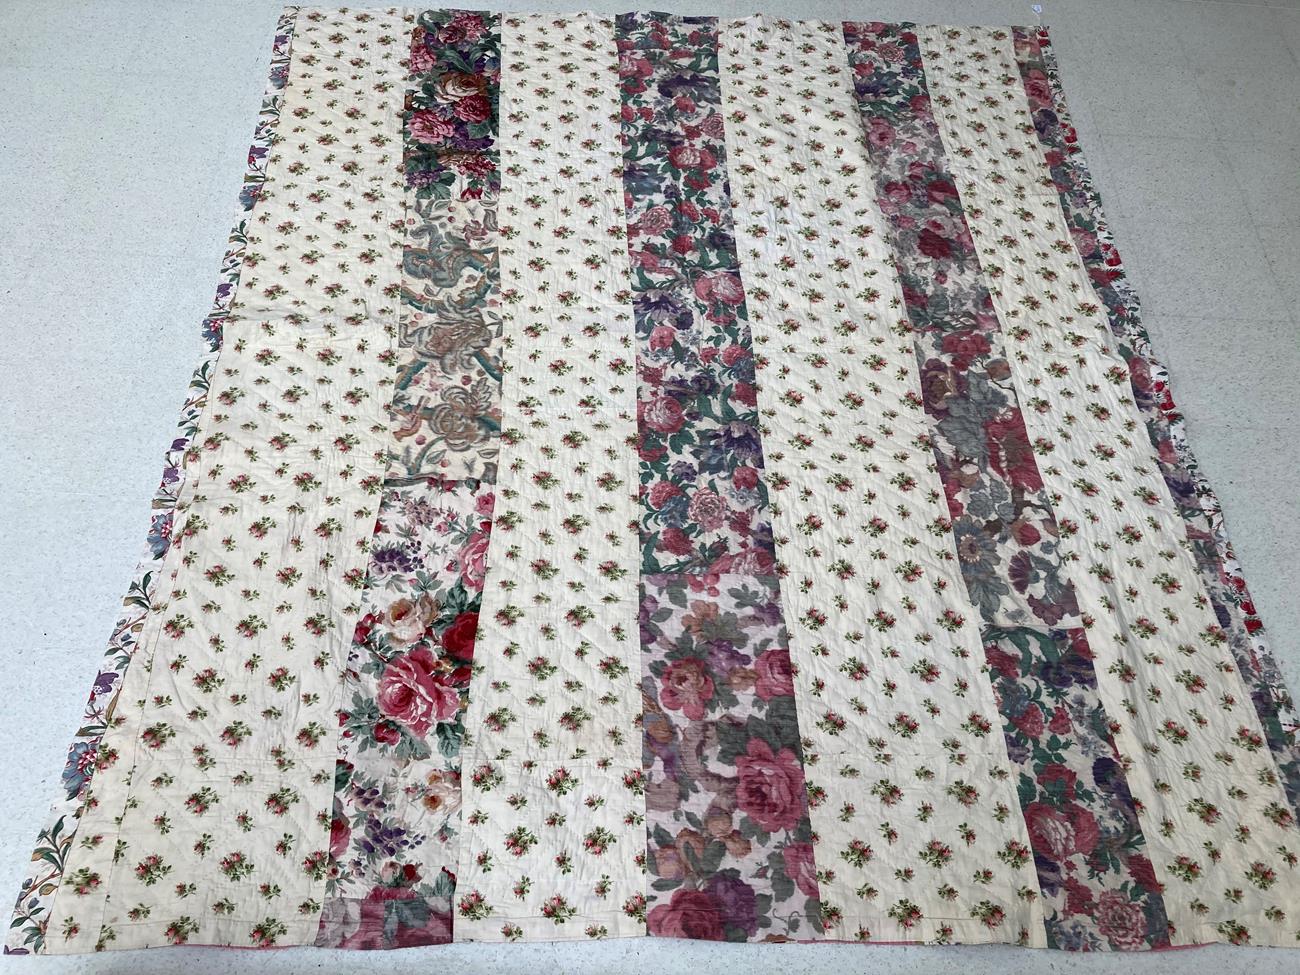 Early 20th Century Decorative Strippy Quilt, incorporating stripes of pale pink and coloured flowers - Image 3 of 3